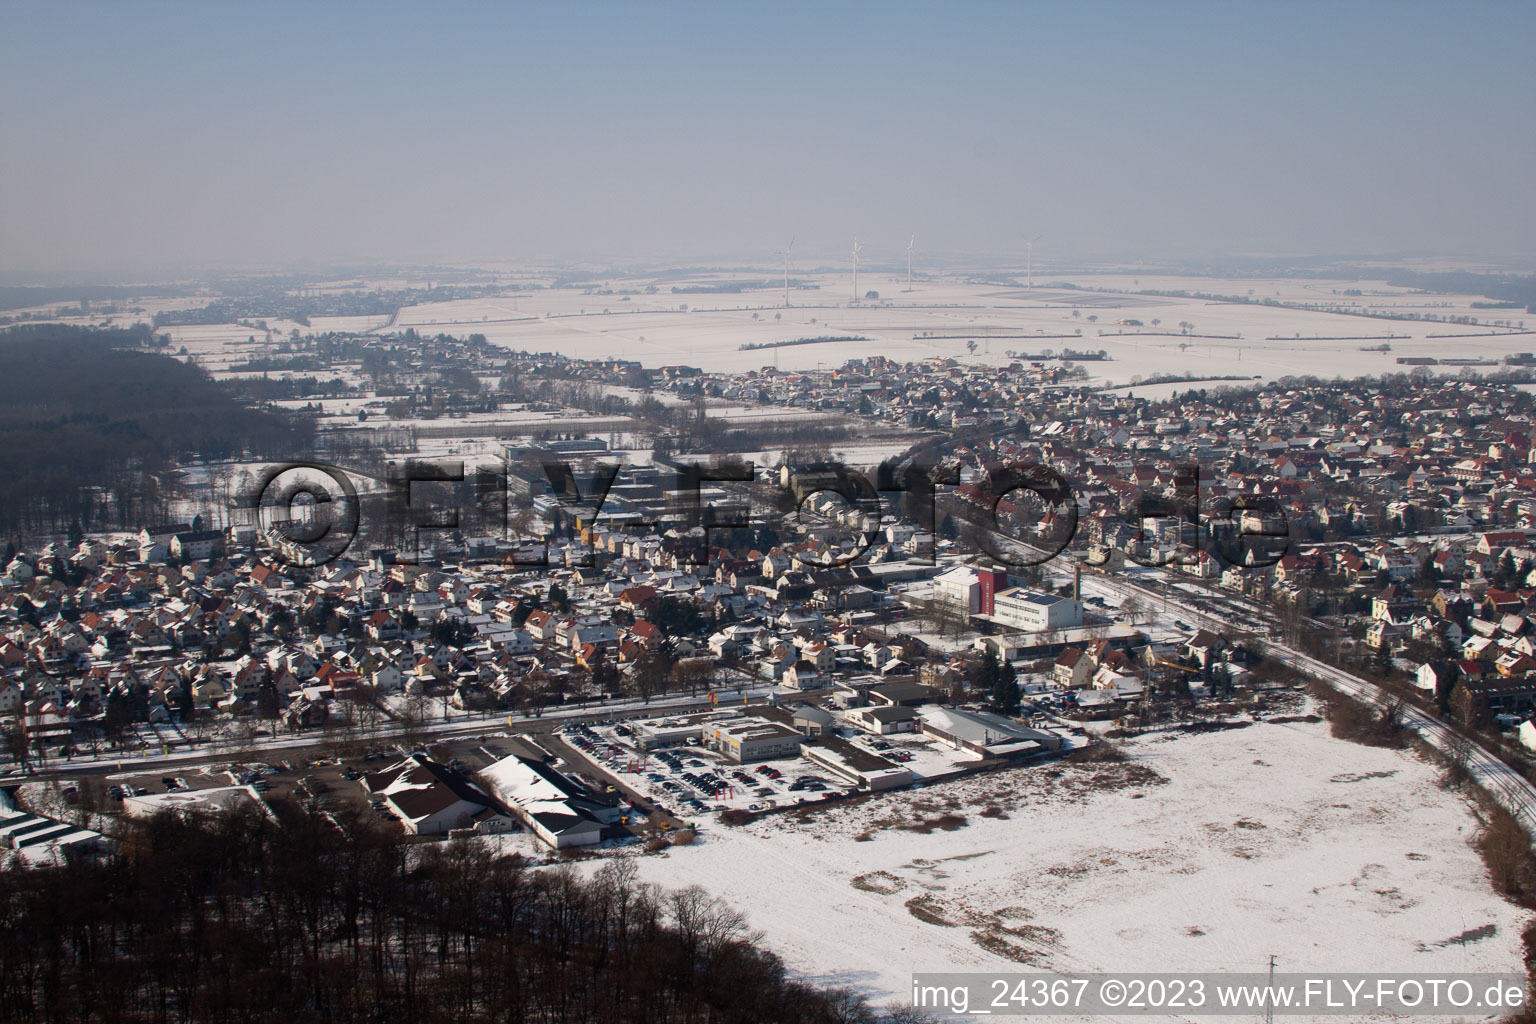 Aerial view of From the southeast in Kandel in the state Rhineland-Palatinate, Germany